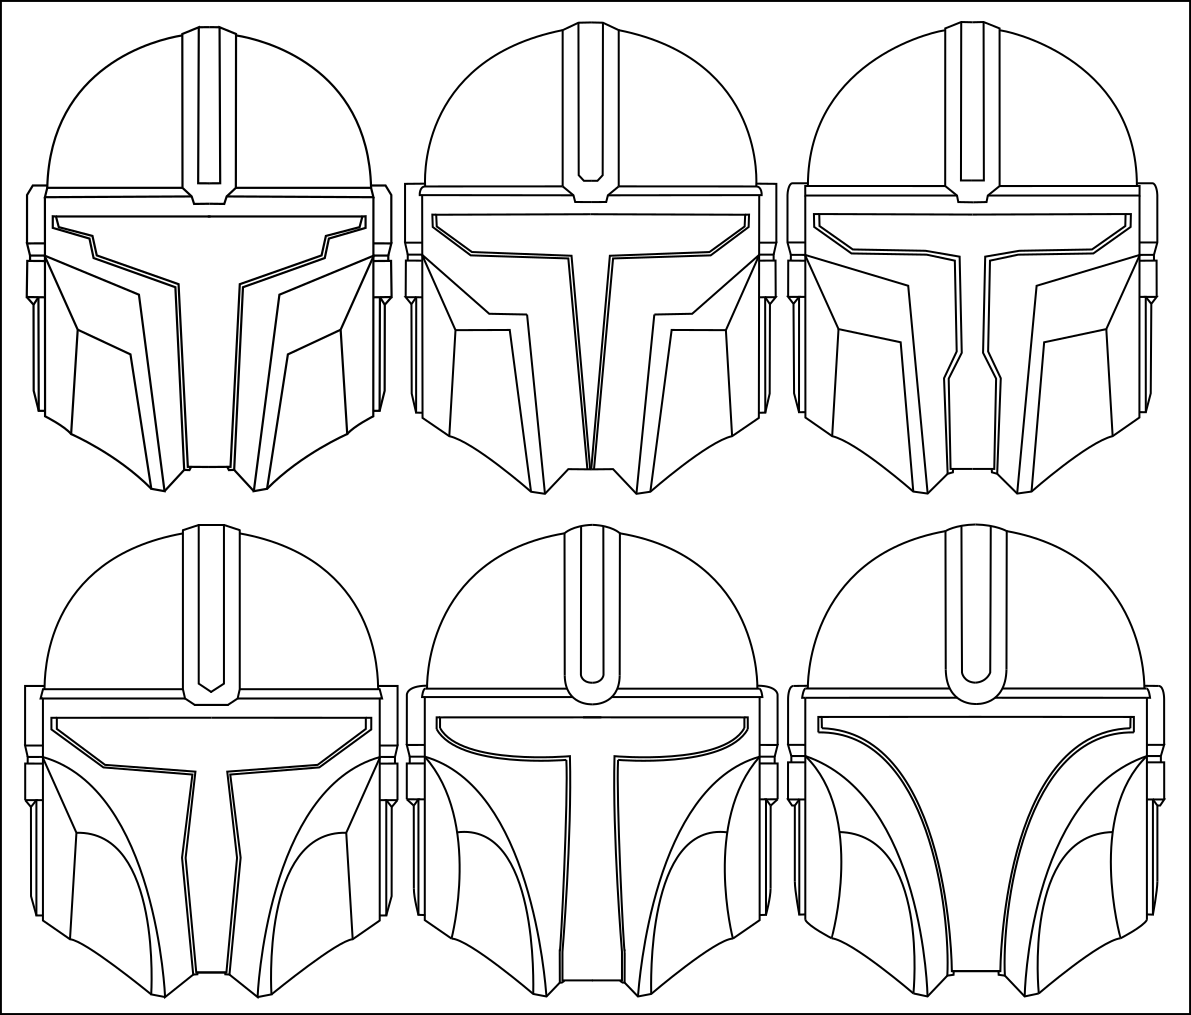 Tried to make my own mandalorian helmet concepts id like to hear your opinions on them rstarwars